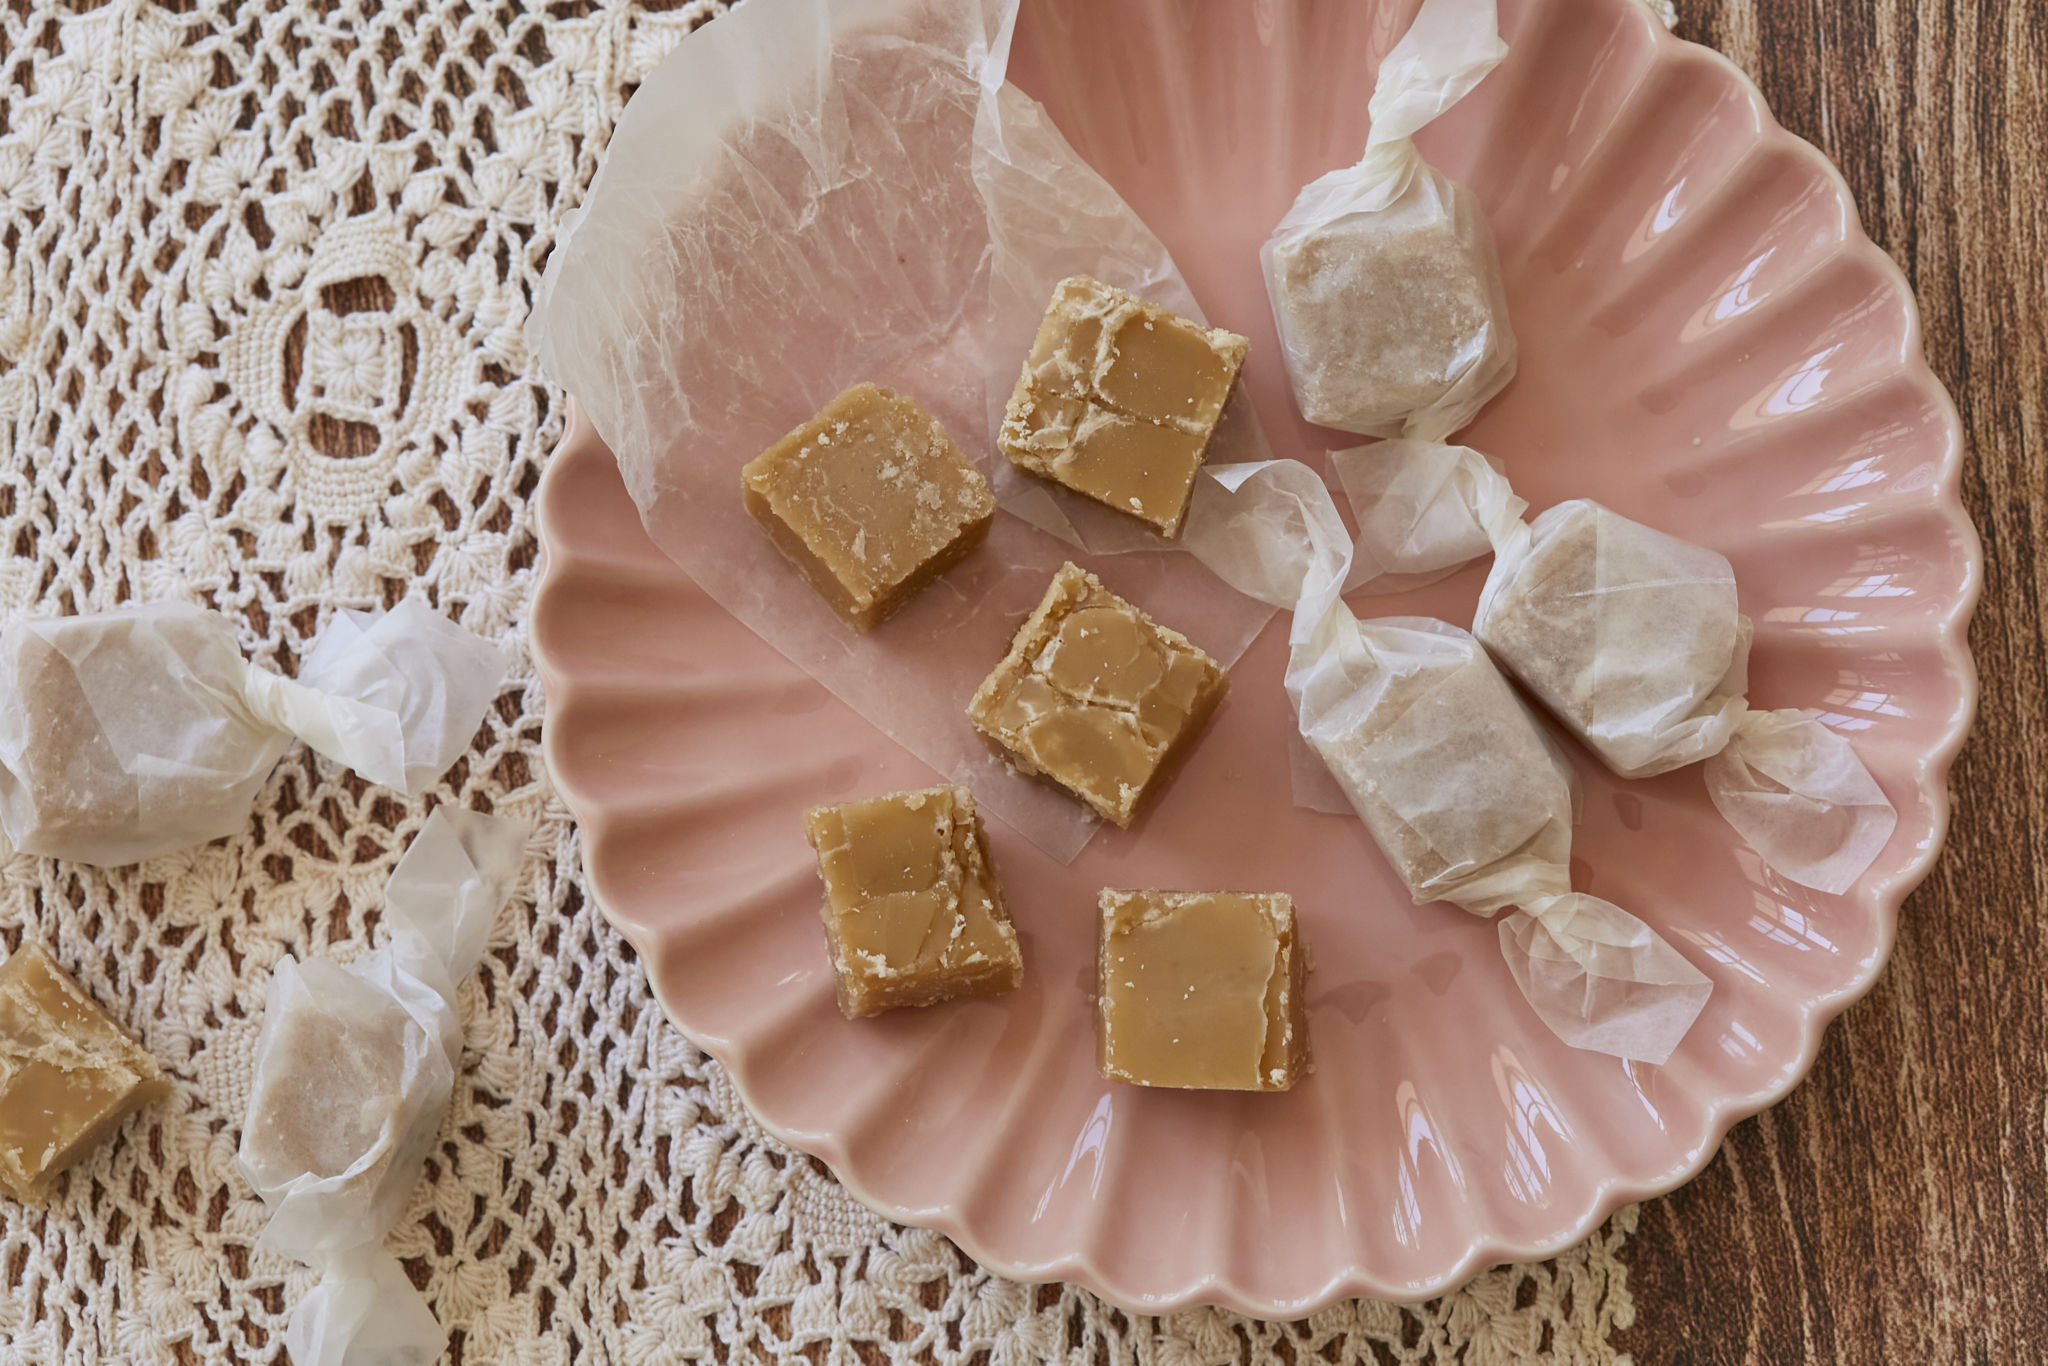 Homemade Maple Candy is served on a pink dish. A few pieces of the pure maple candies are wrapped in parchment paper.